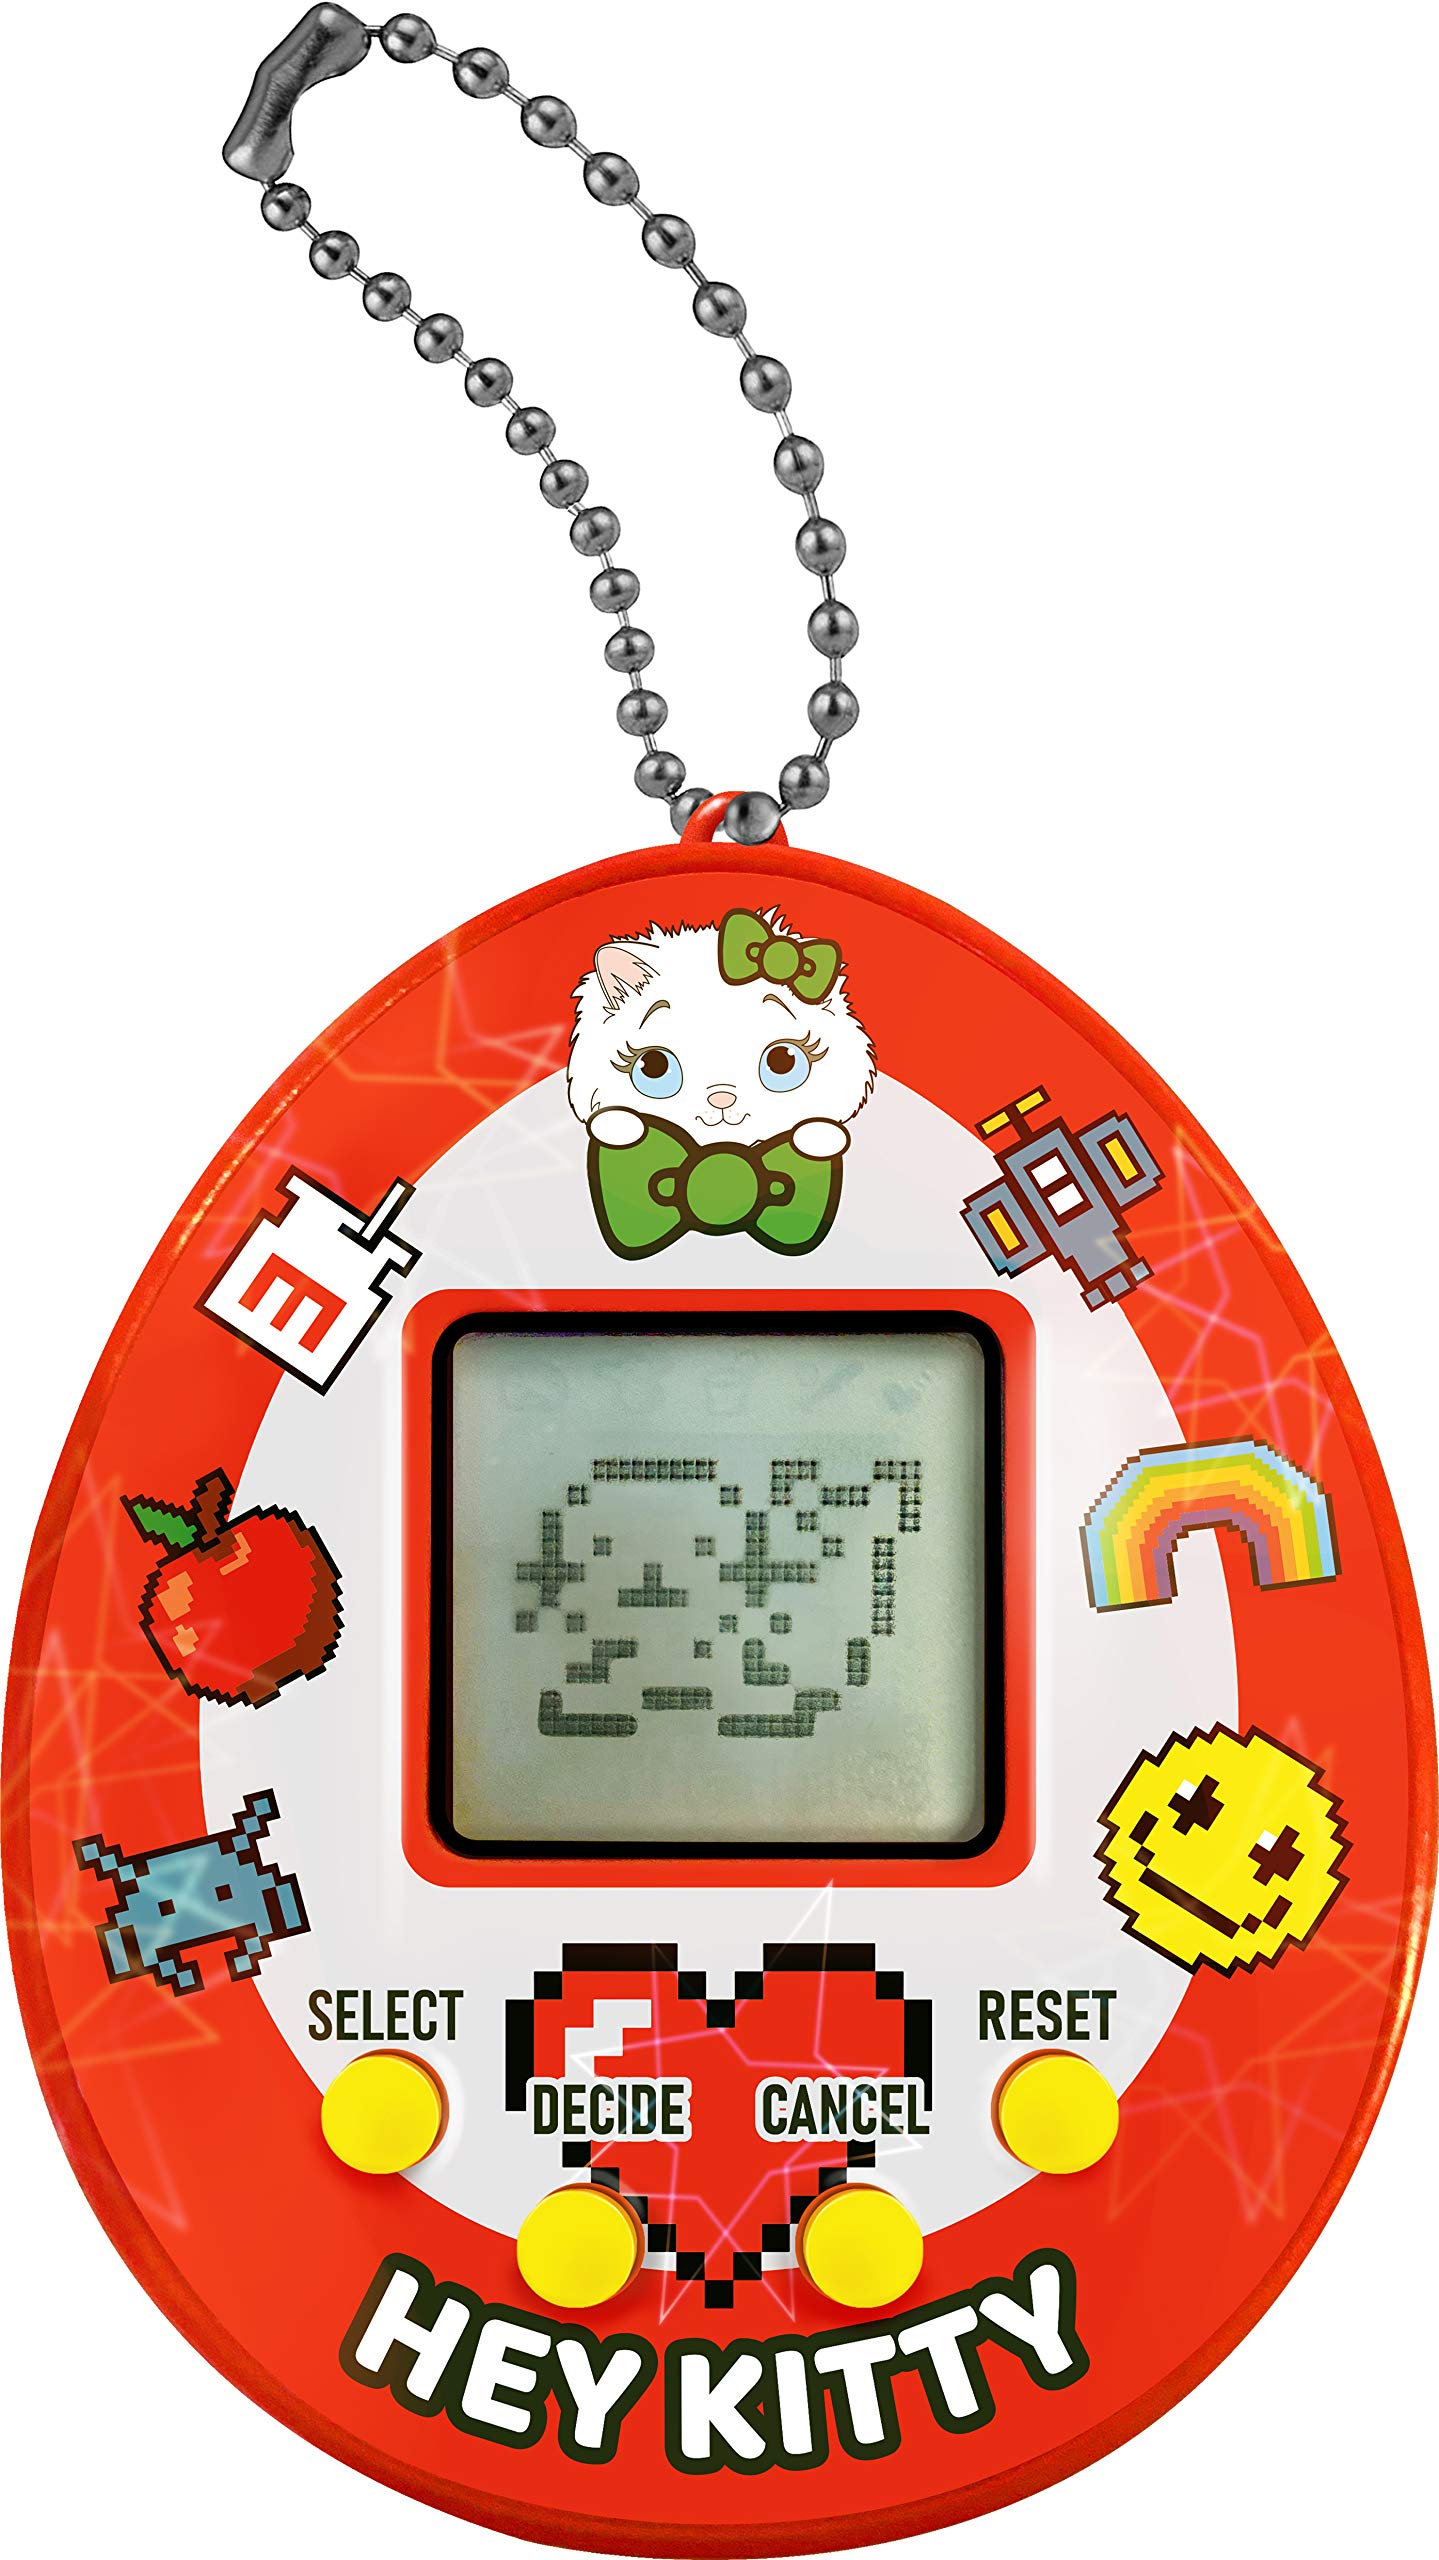 Hey Kitty Virtual Pet for Kids Nano Pet Toy Electronic Pet Digital Animal Games Keychain168 in 1, Kitty Dogs Panda T-Rex and Other Pets Baby Cat Unicorn Dinosaur Nostalgic Adults